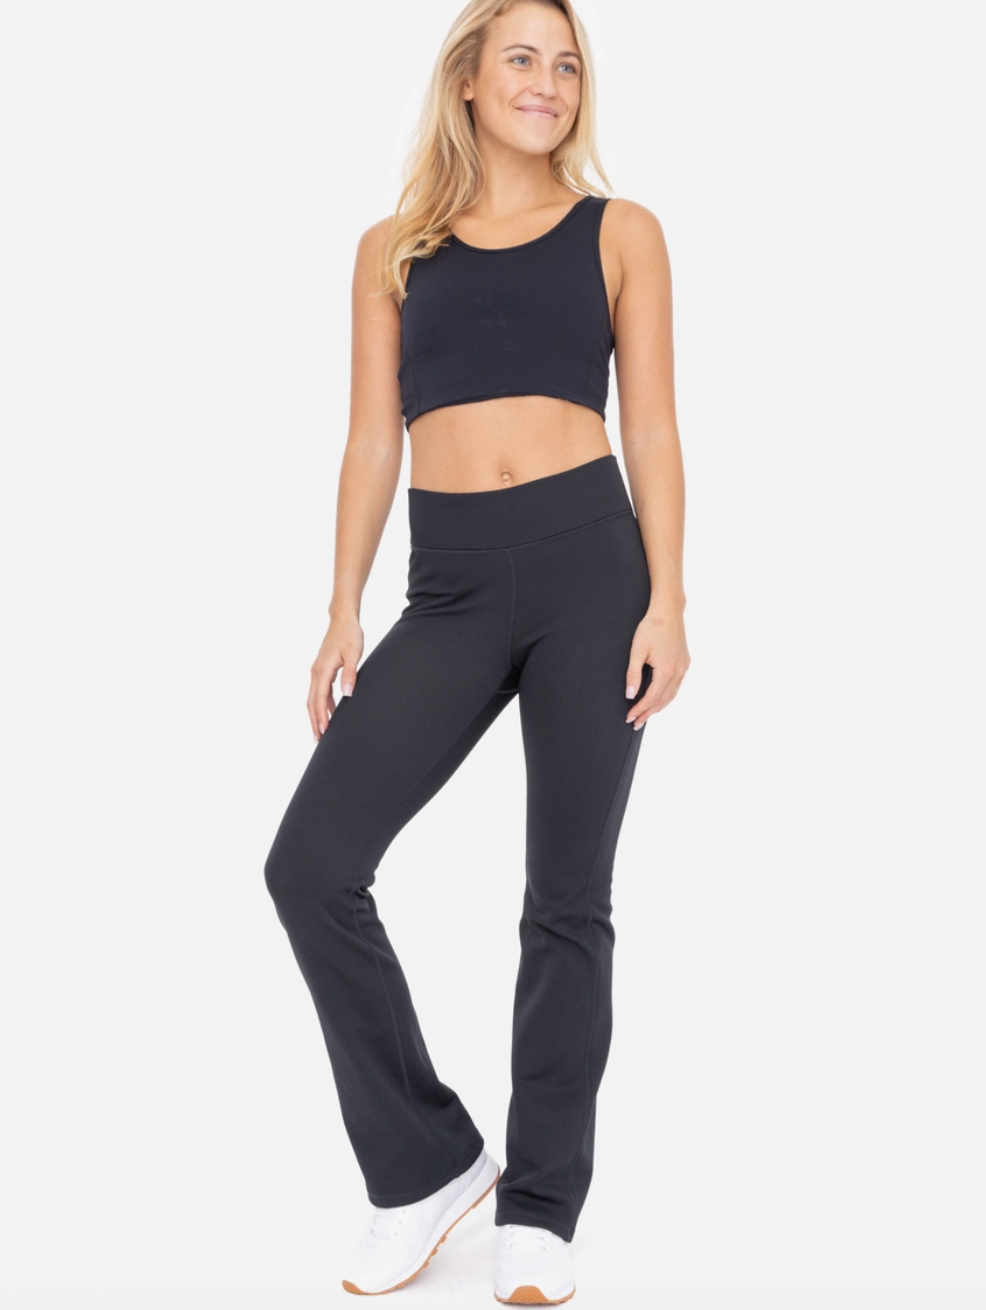 fleece lined flare yoga pant – Kindred People